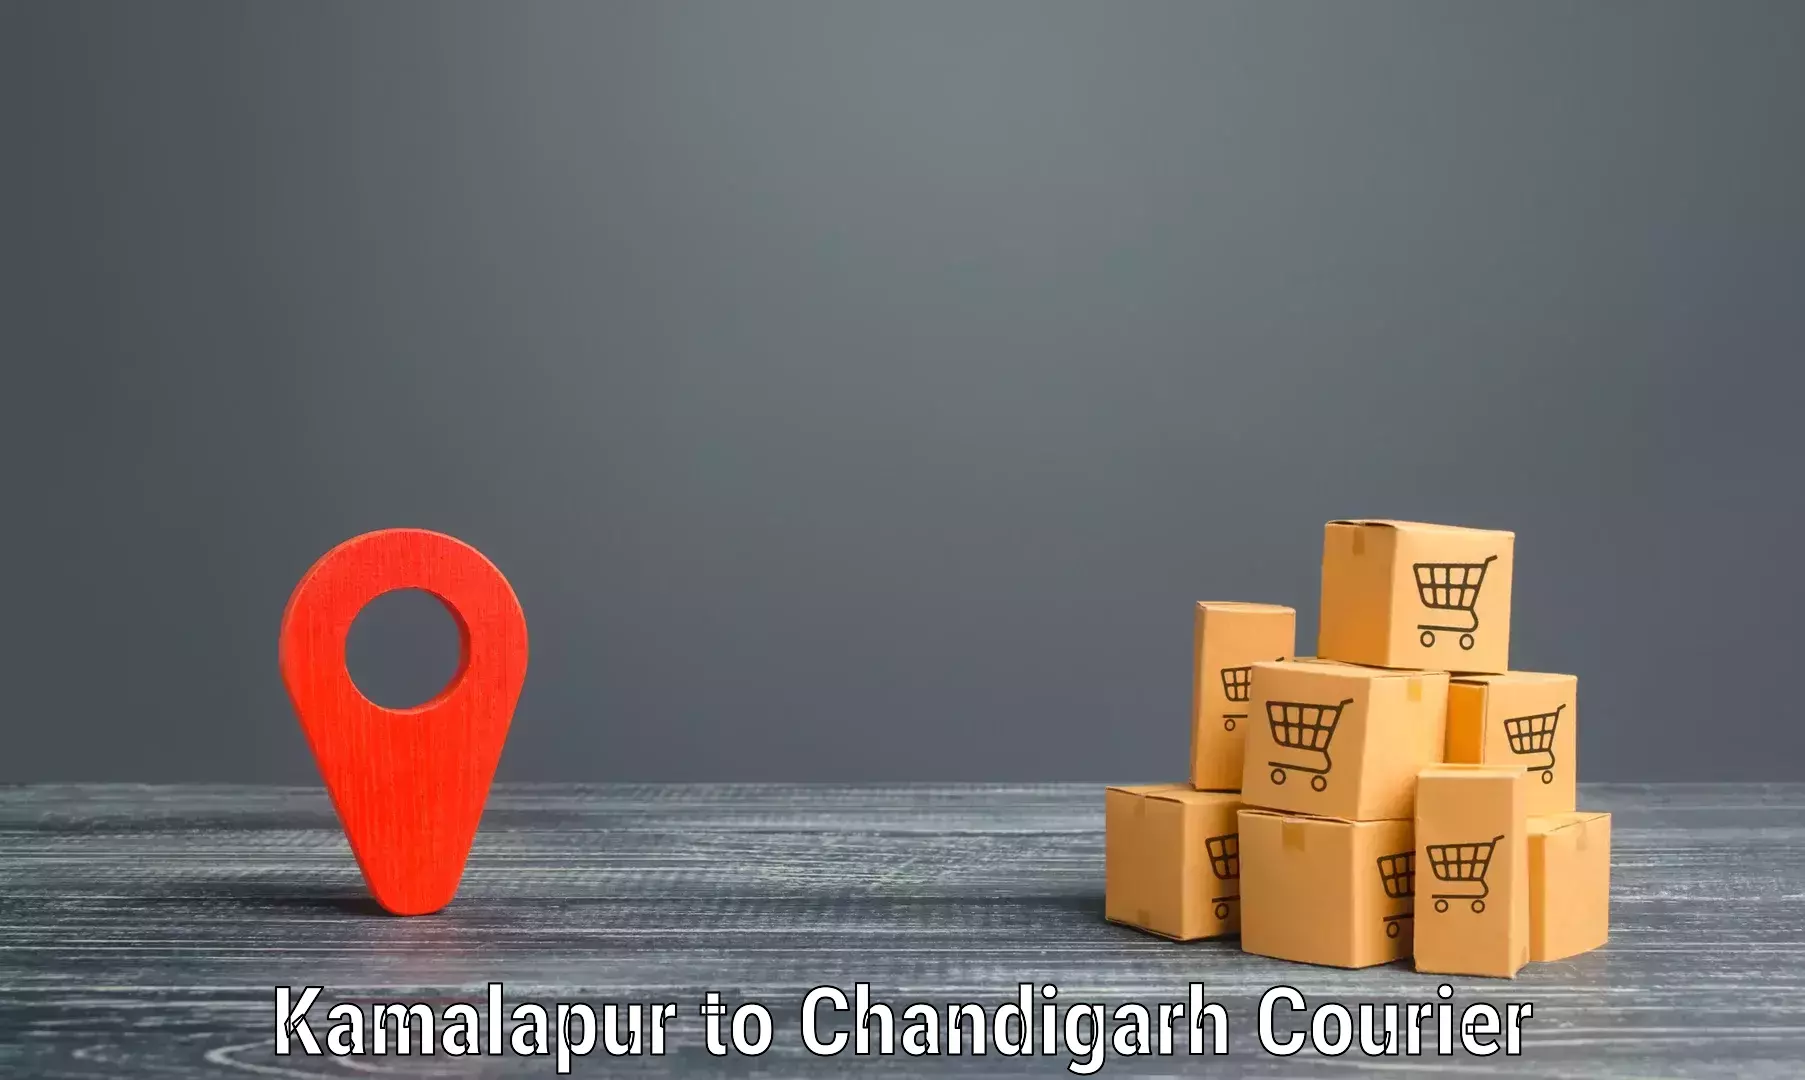 Business delivery service Kamalapur to Chandigarh